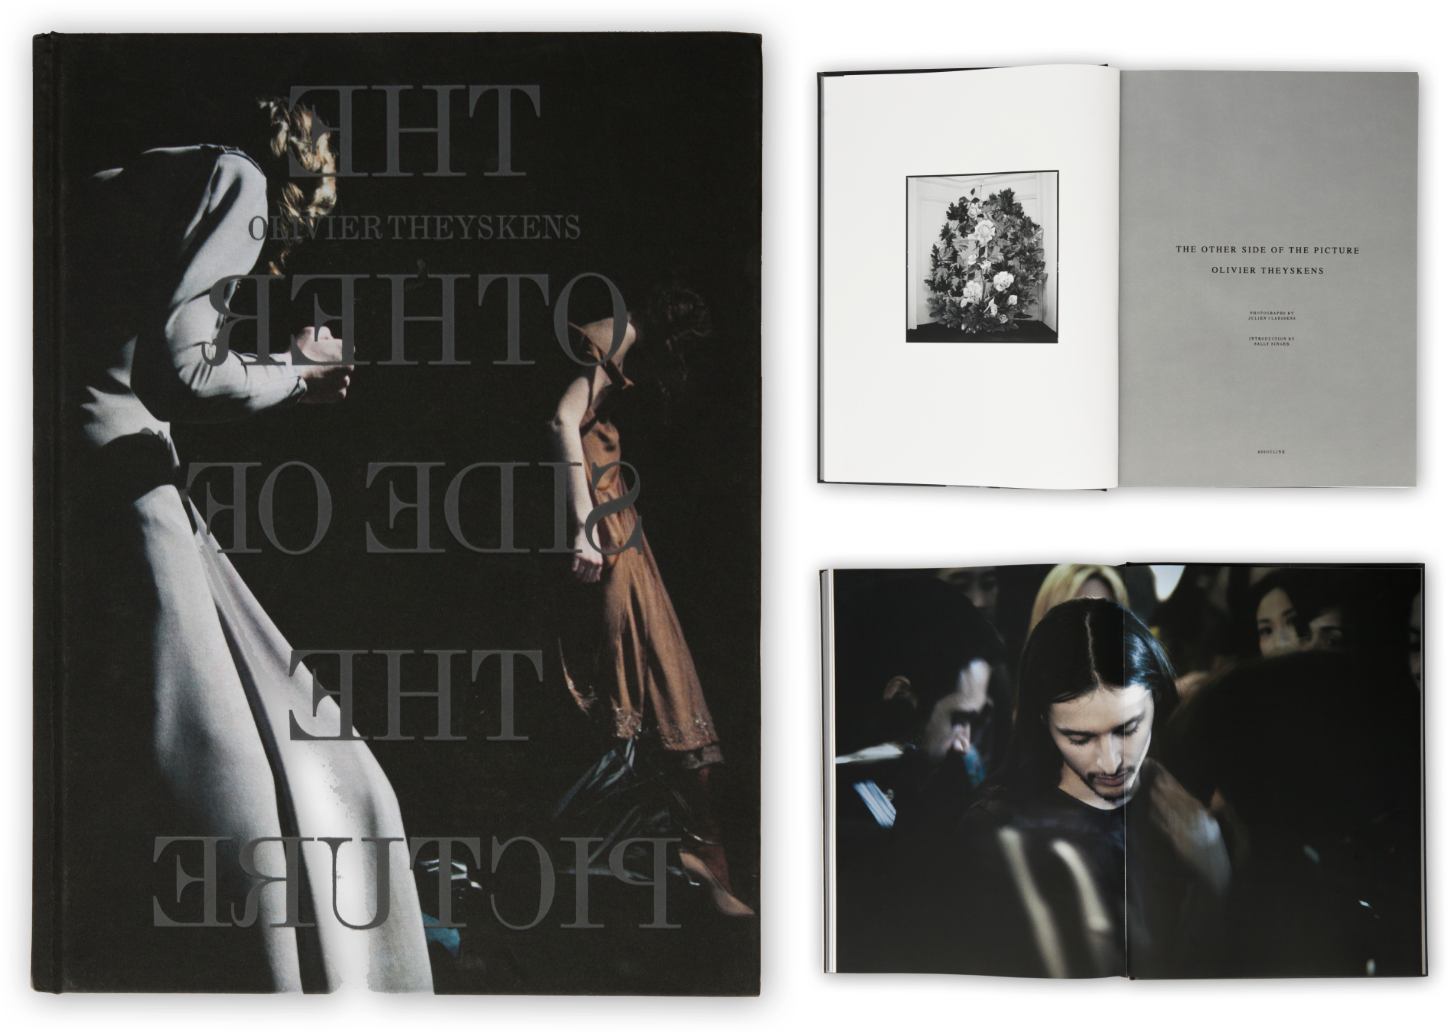 Olivier Theyskens book at Assouline Editions - Cover and inside - by Talia Souki